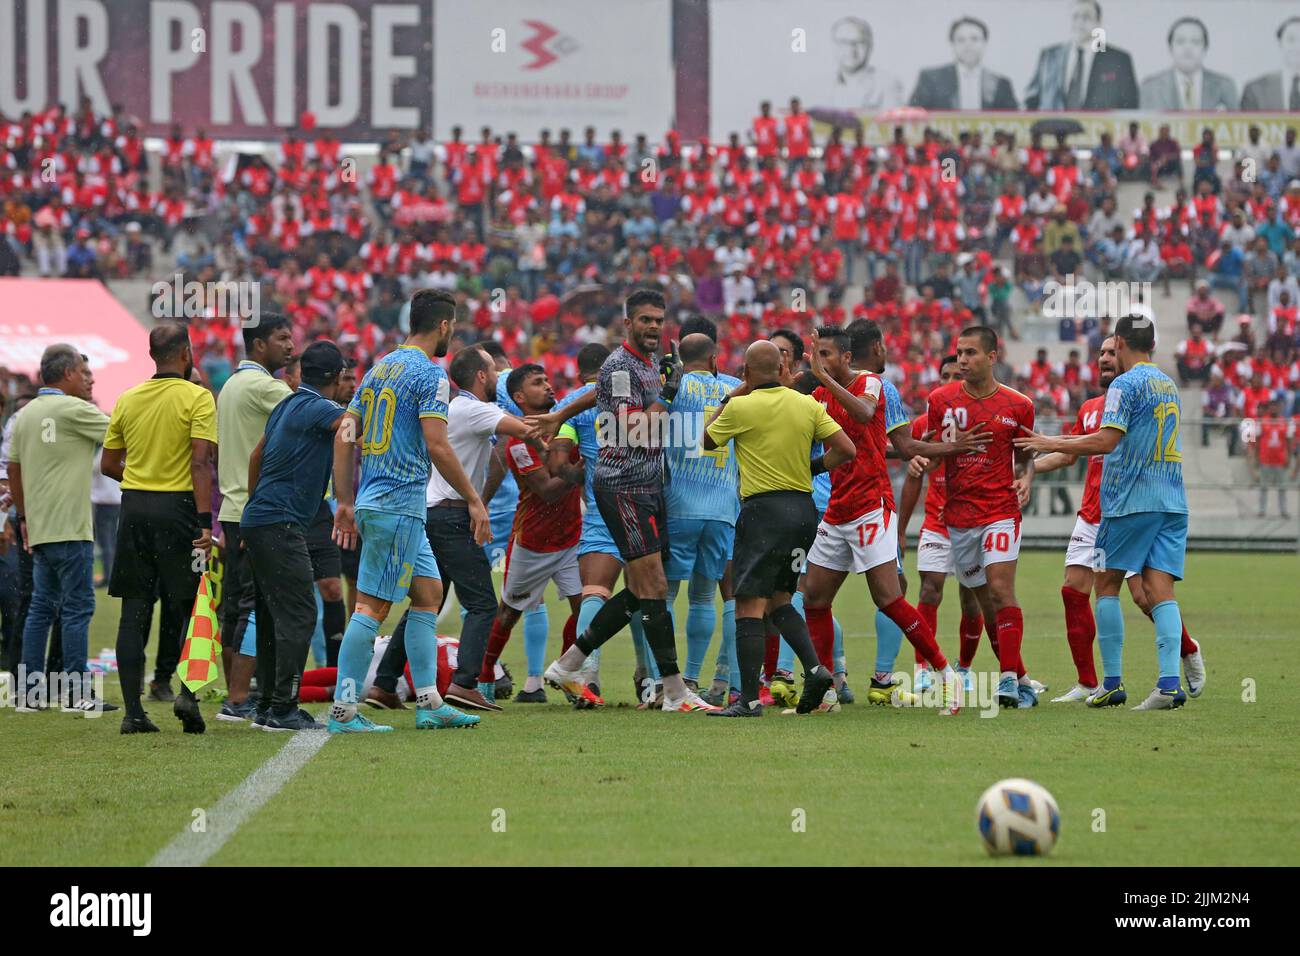 The players of the two teams got into an argument and clash during the Bangladesh Premier League match between Basundhra Kings and Abahani Ltd. At the Stock Photo